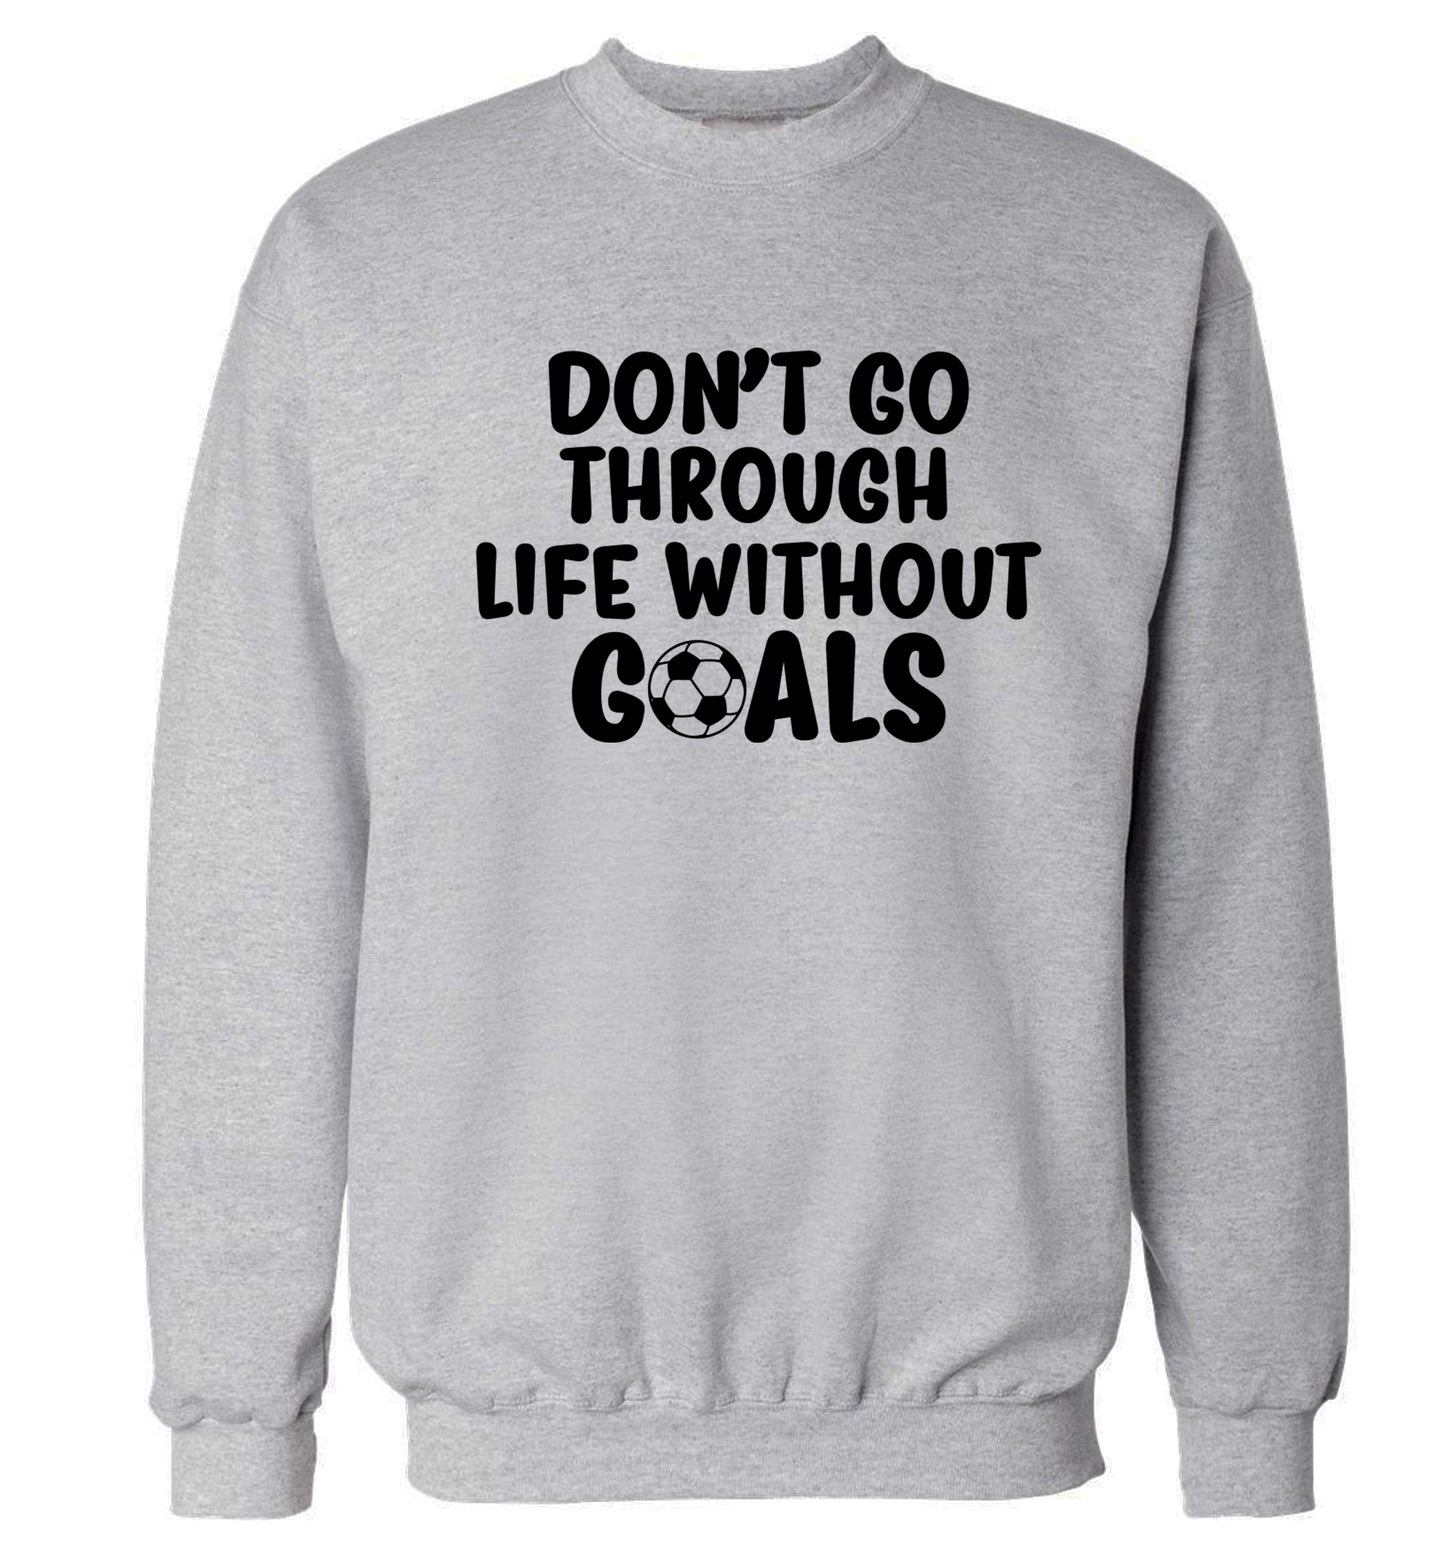 Don't go through life without goals Adult's unisexgrey Sweater 2XL